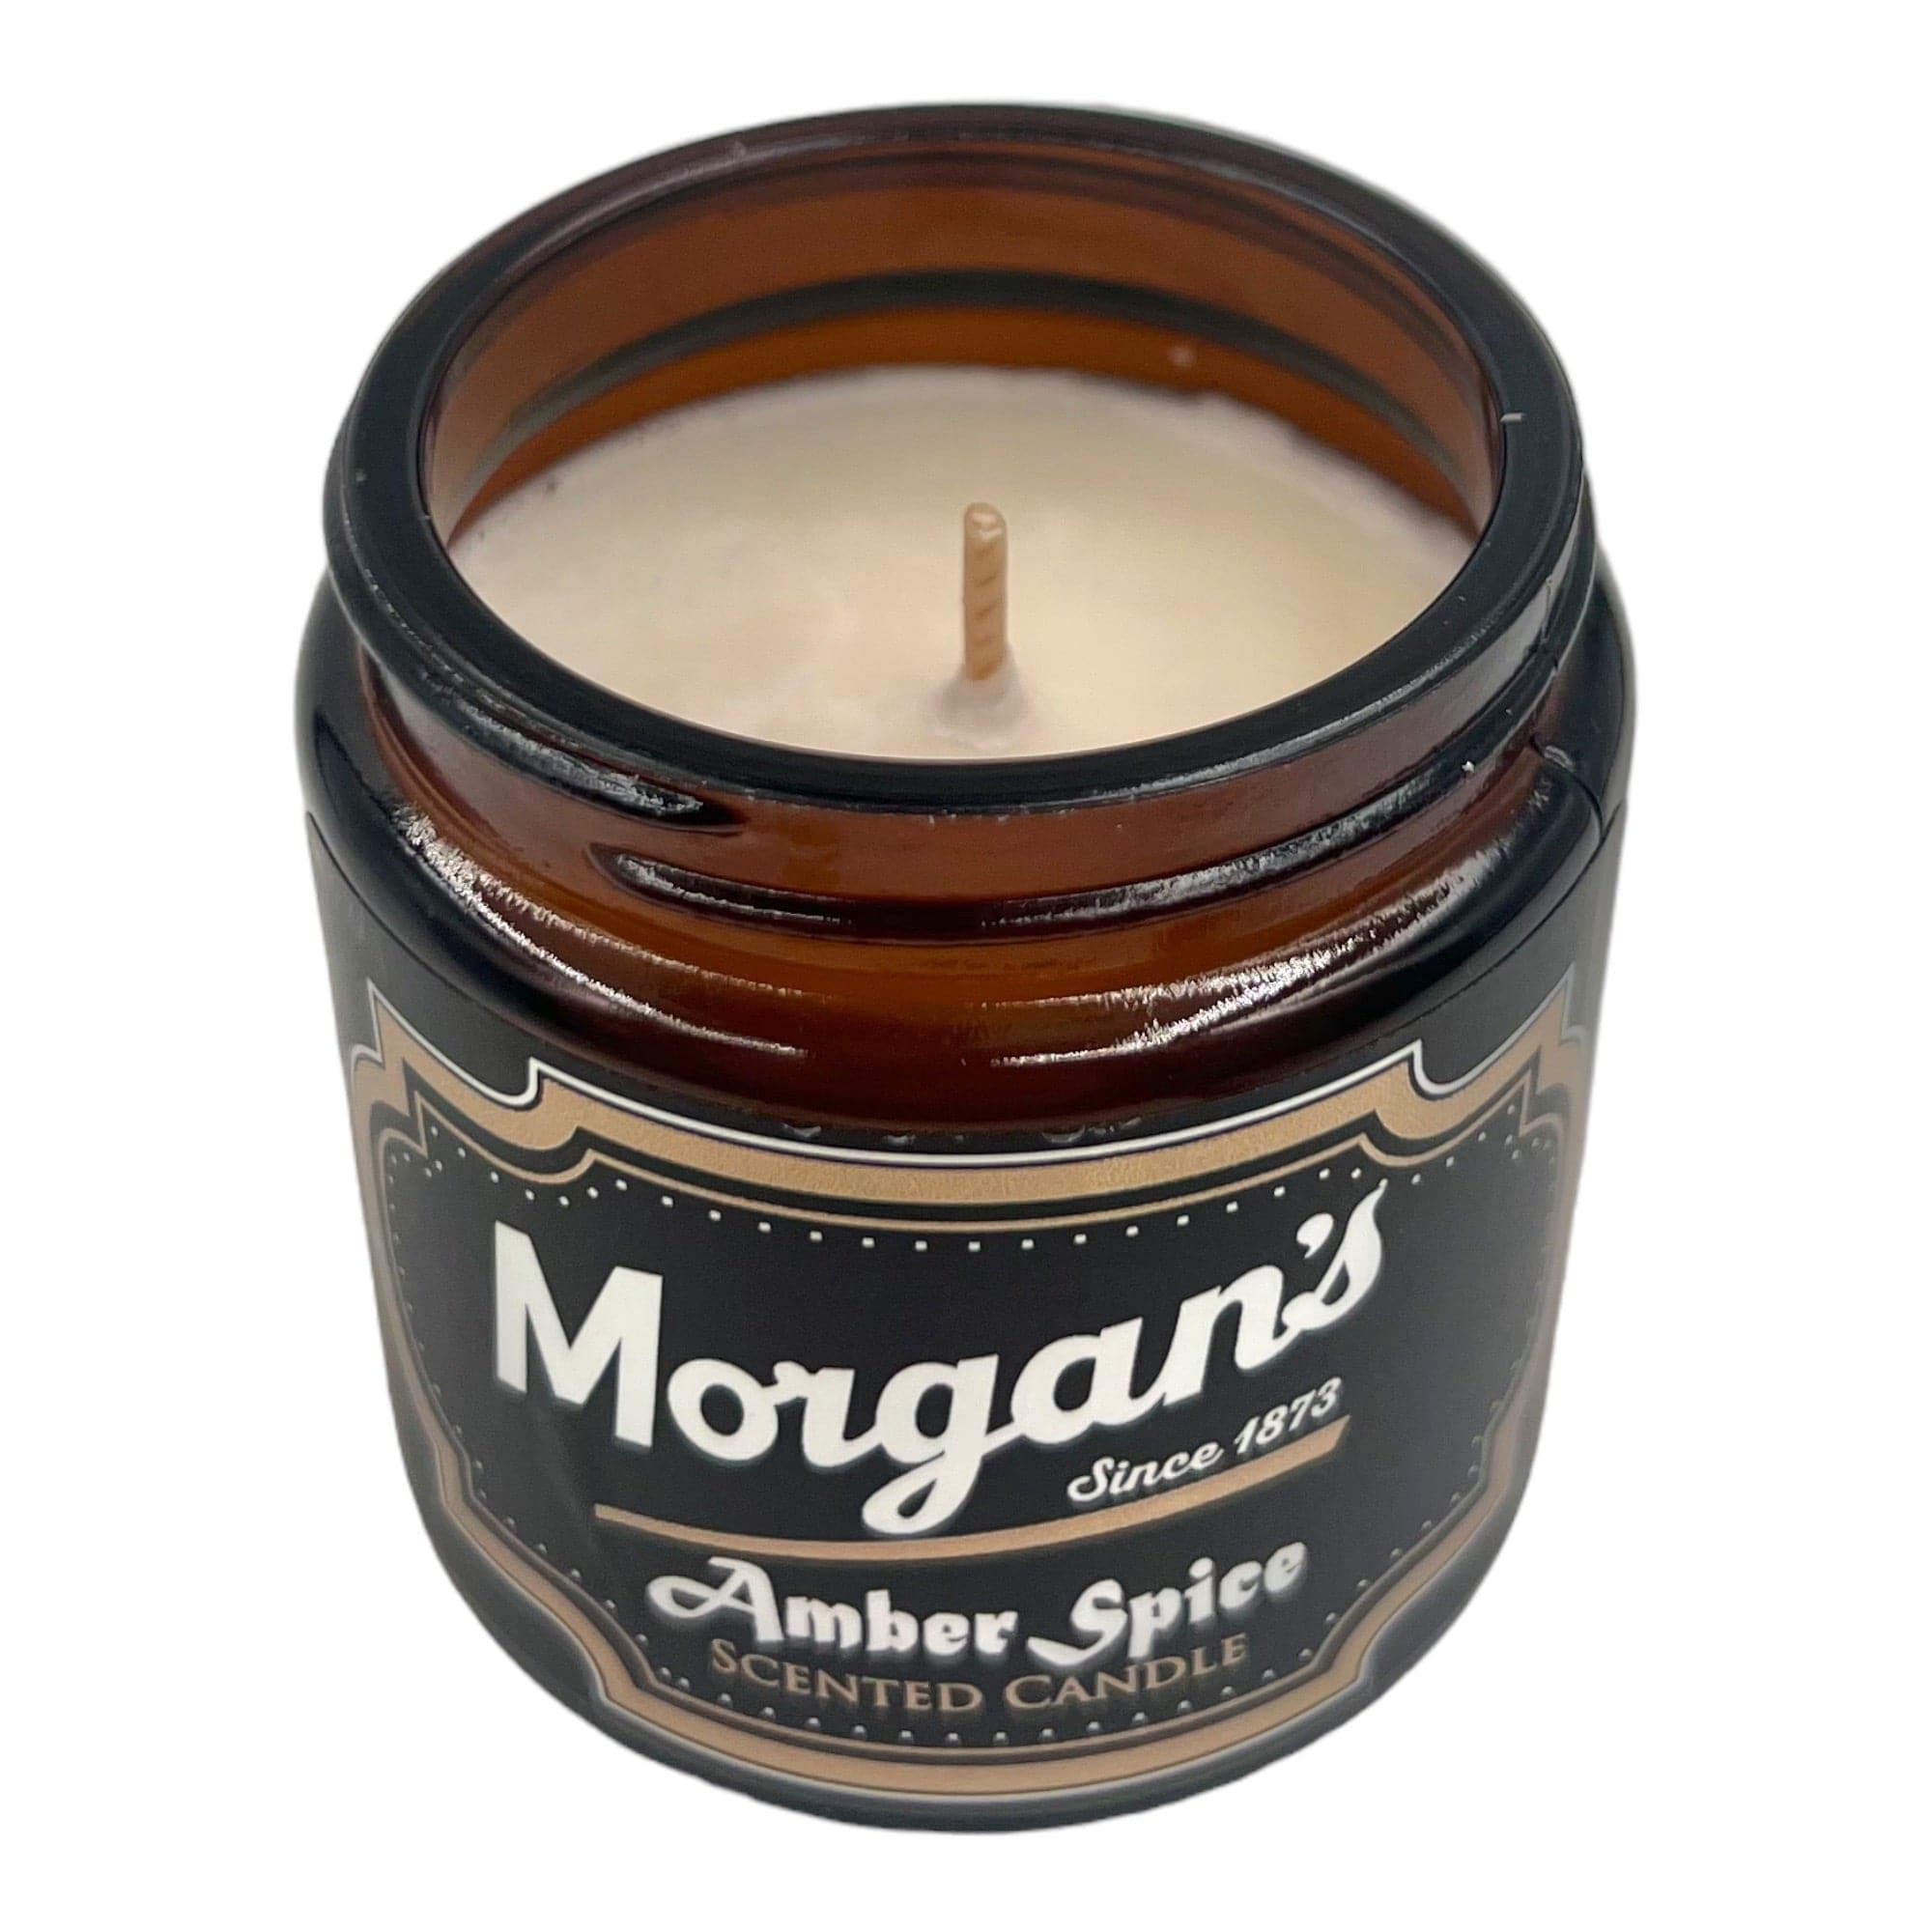 Morgan's - Amber Spice Scented Candle